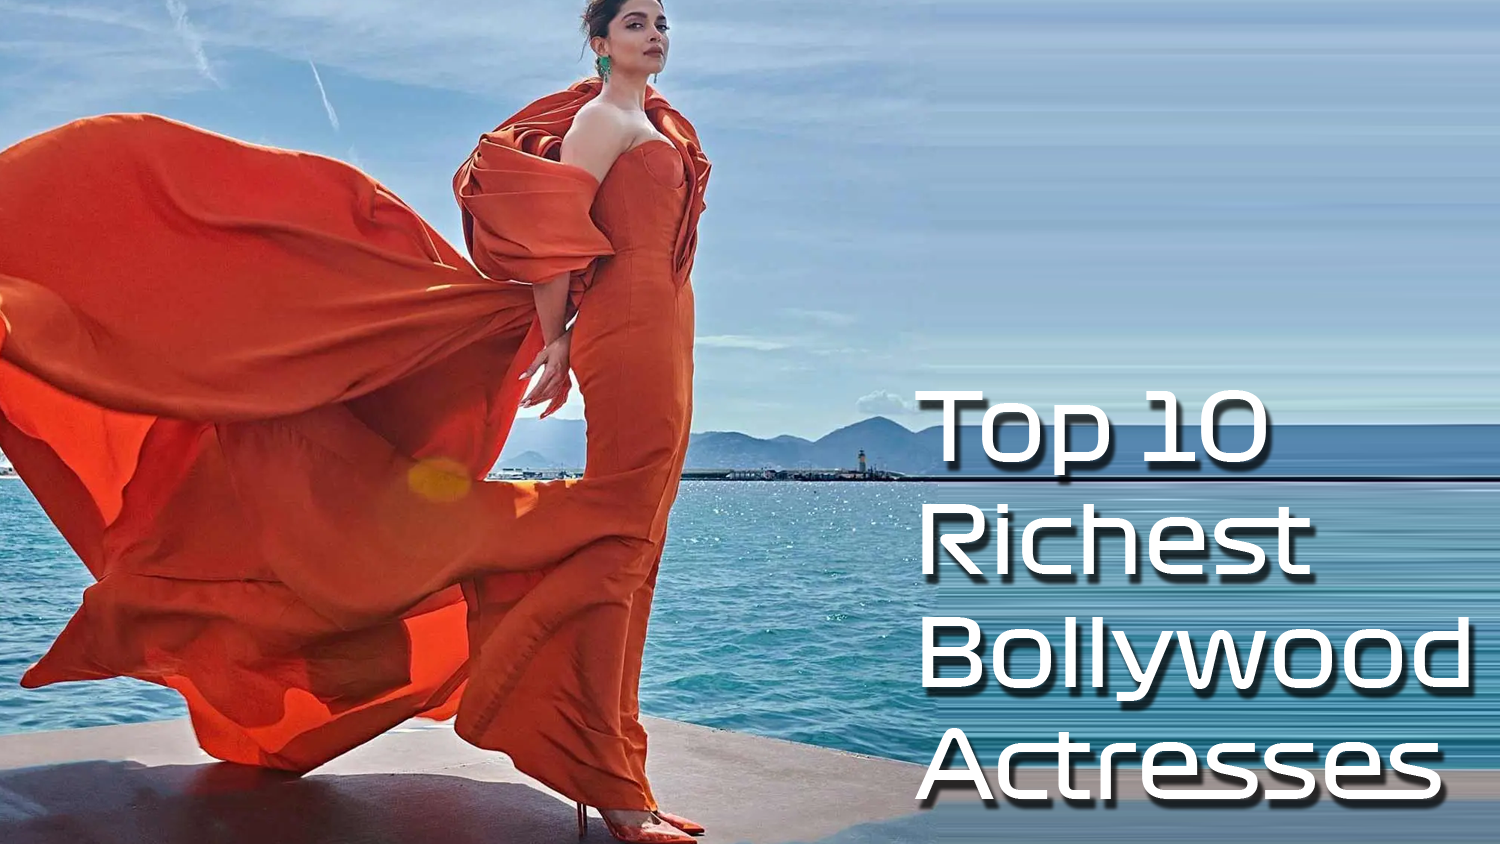 Top 10 Bollywood Richest Actresses